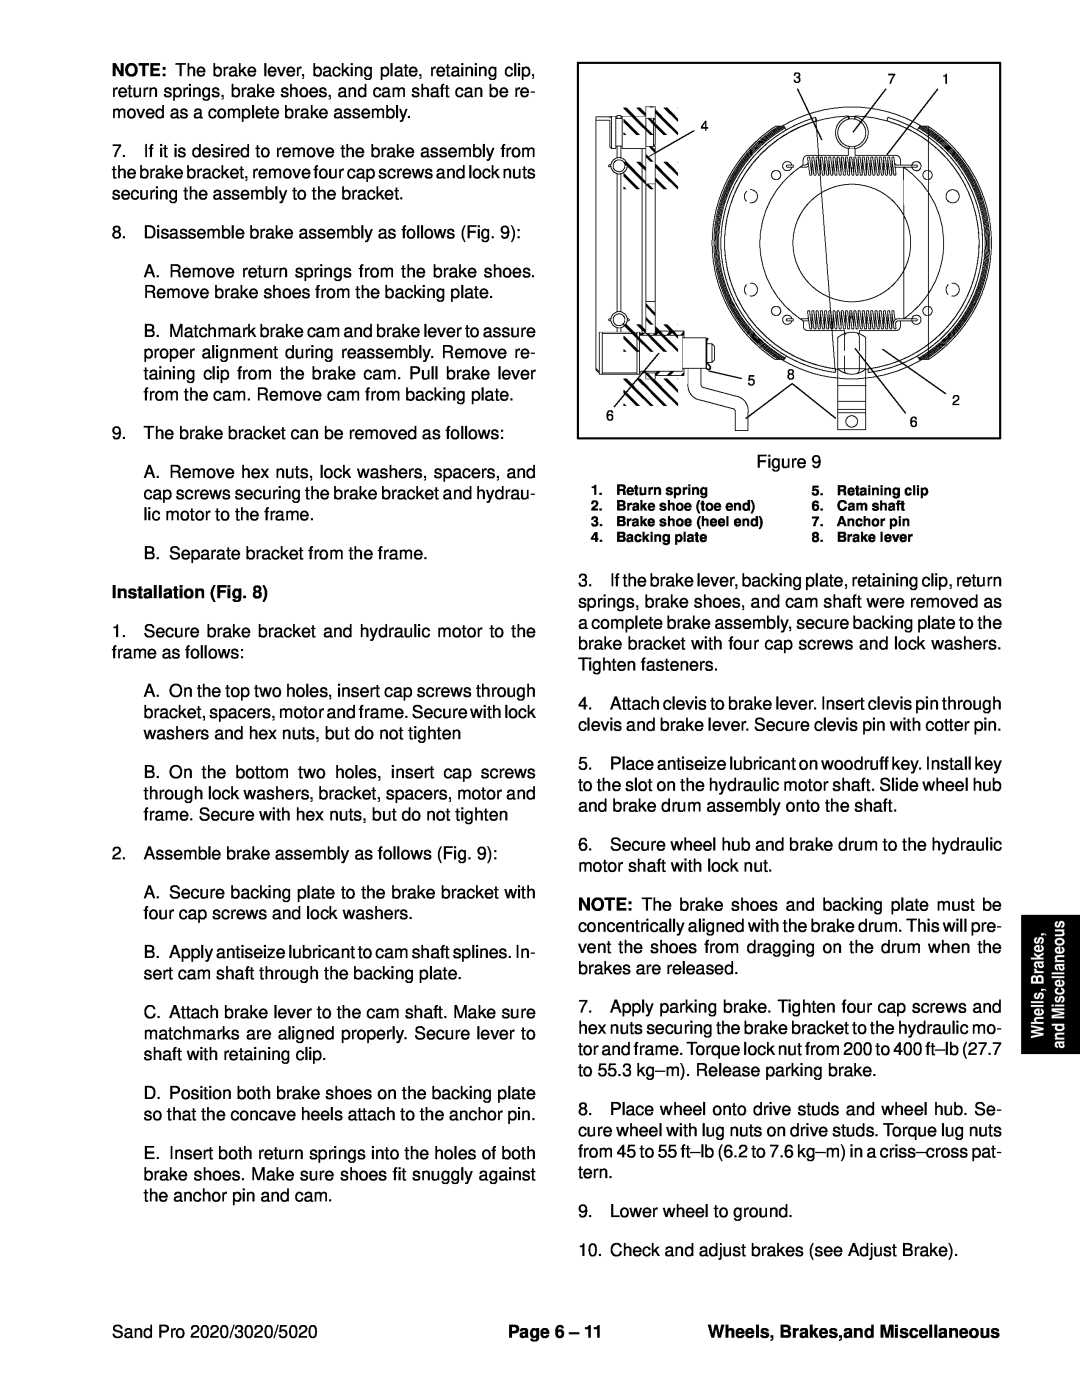 Toro service manual Disassemble brake assembly as follows Fig, Installation Fig, Sand Pro 2020/3020/5020, Page 6 